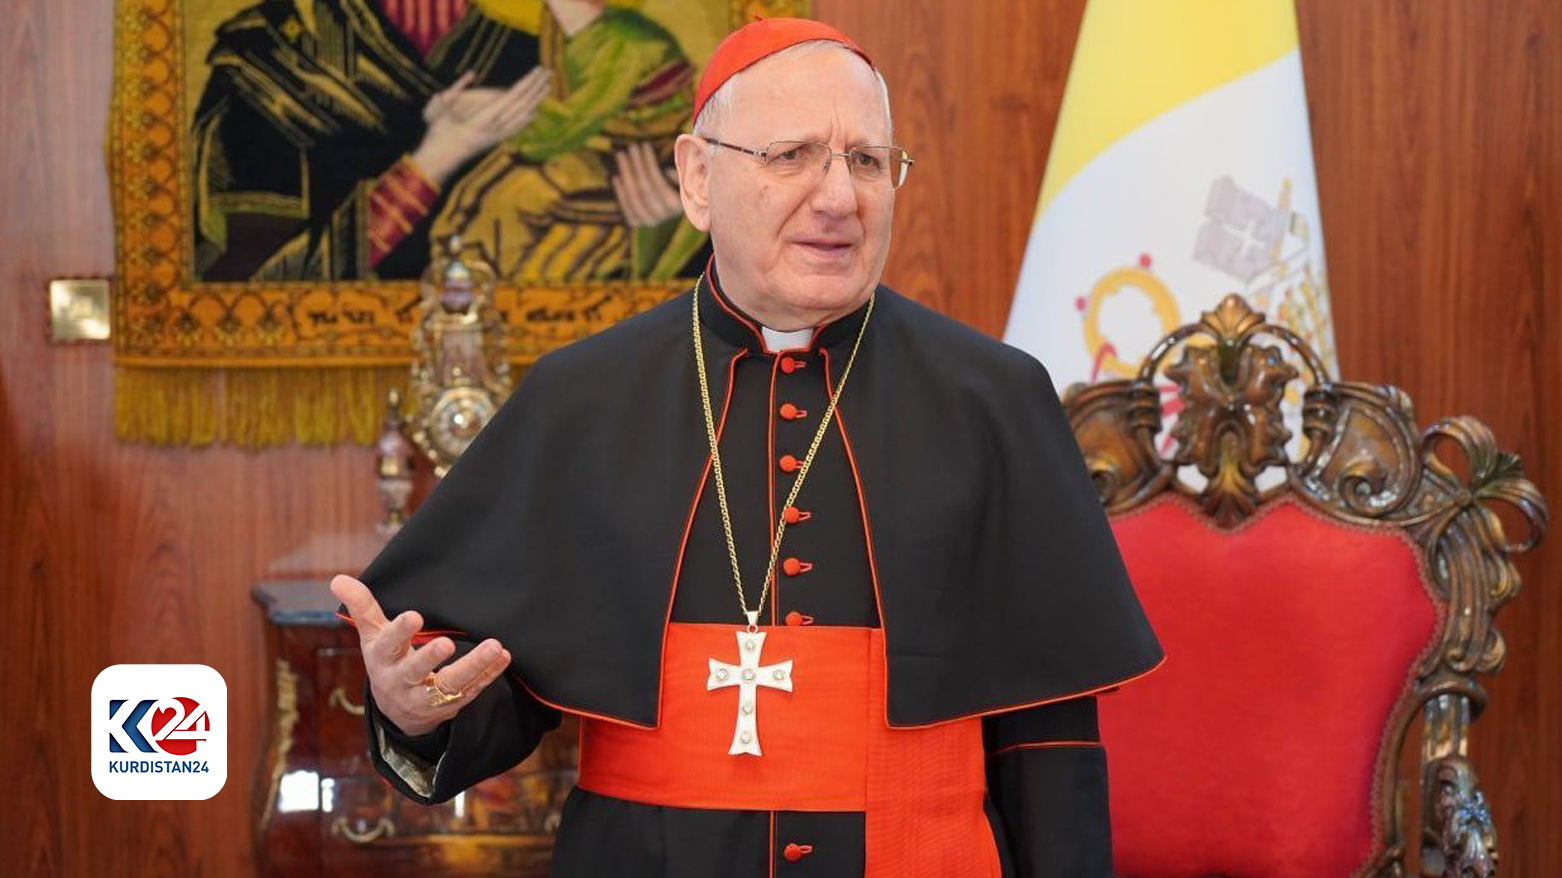 Cardinal Louis Sako reinstates his position as Patriarch of Chaldean Catholic Church in Iraq and World